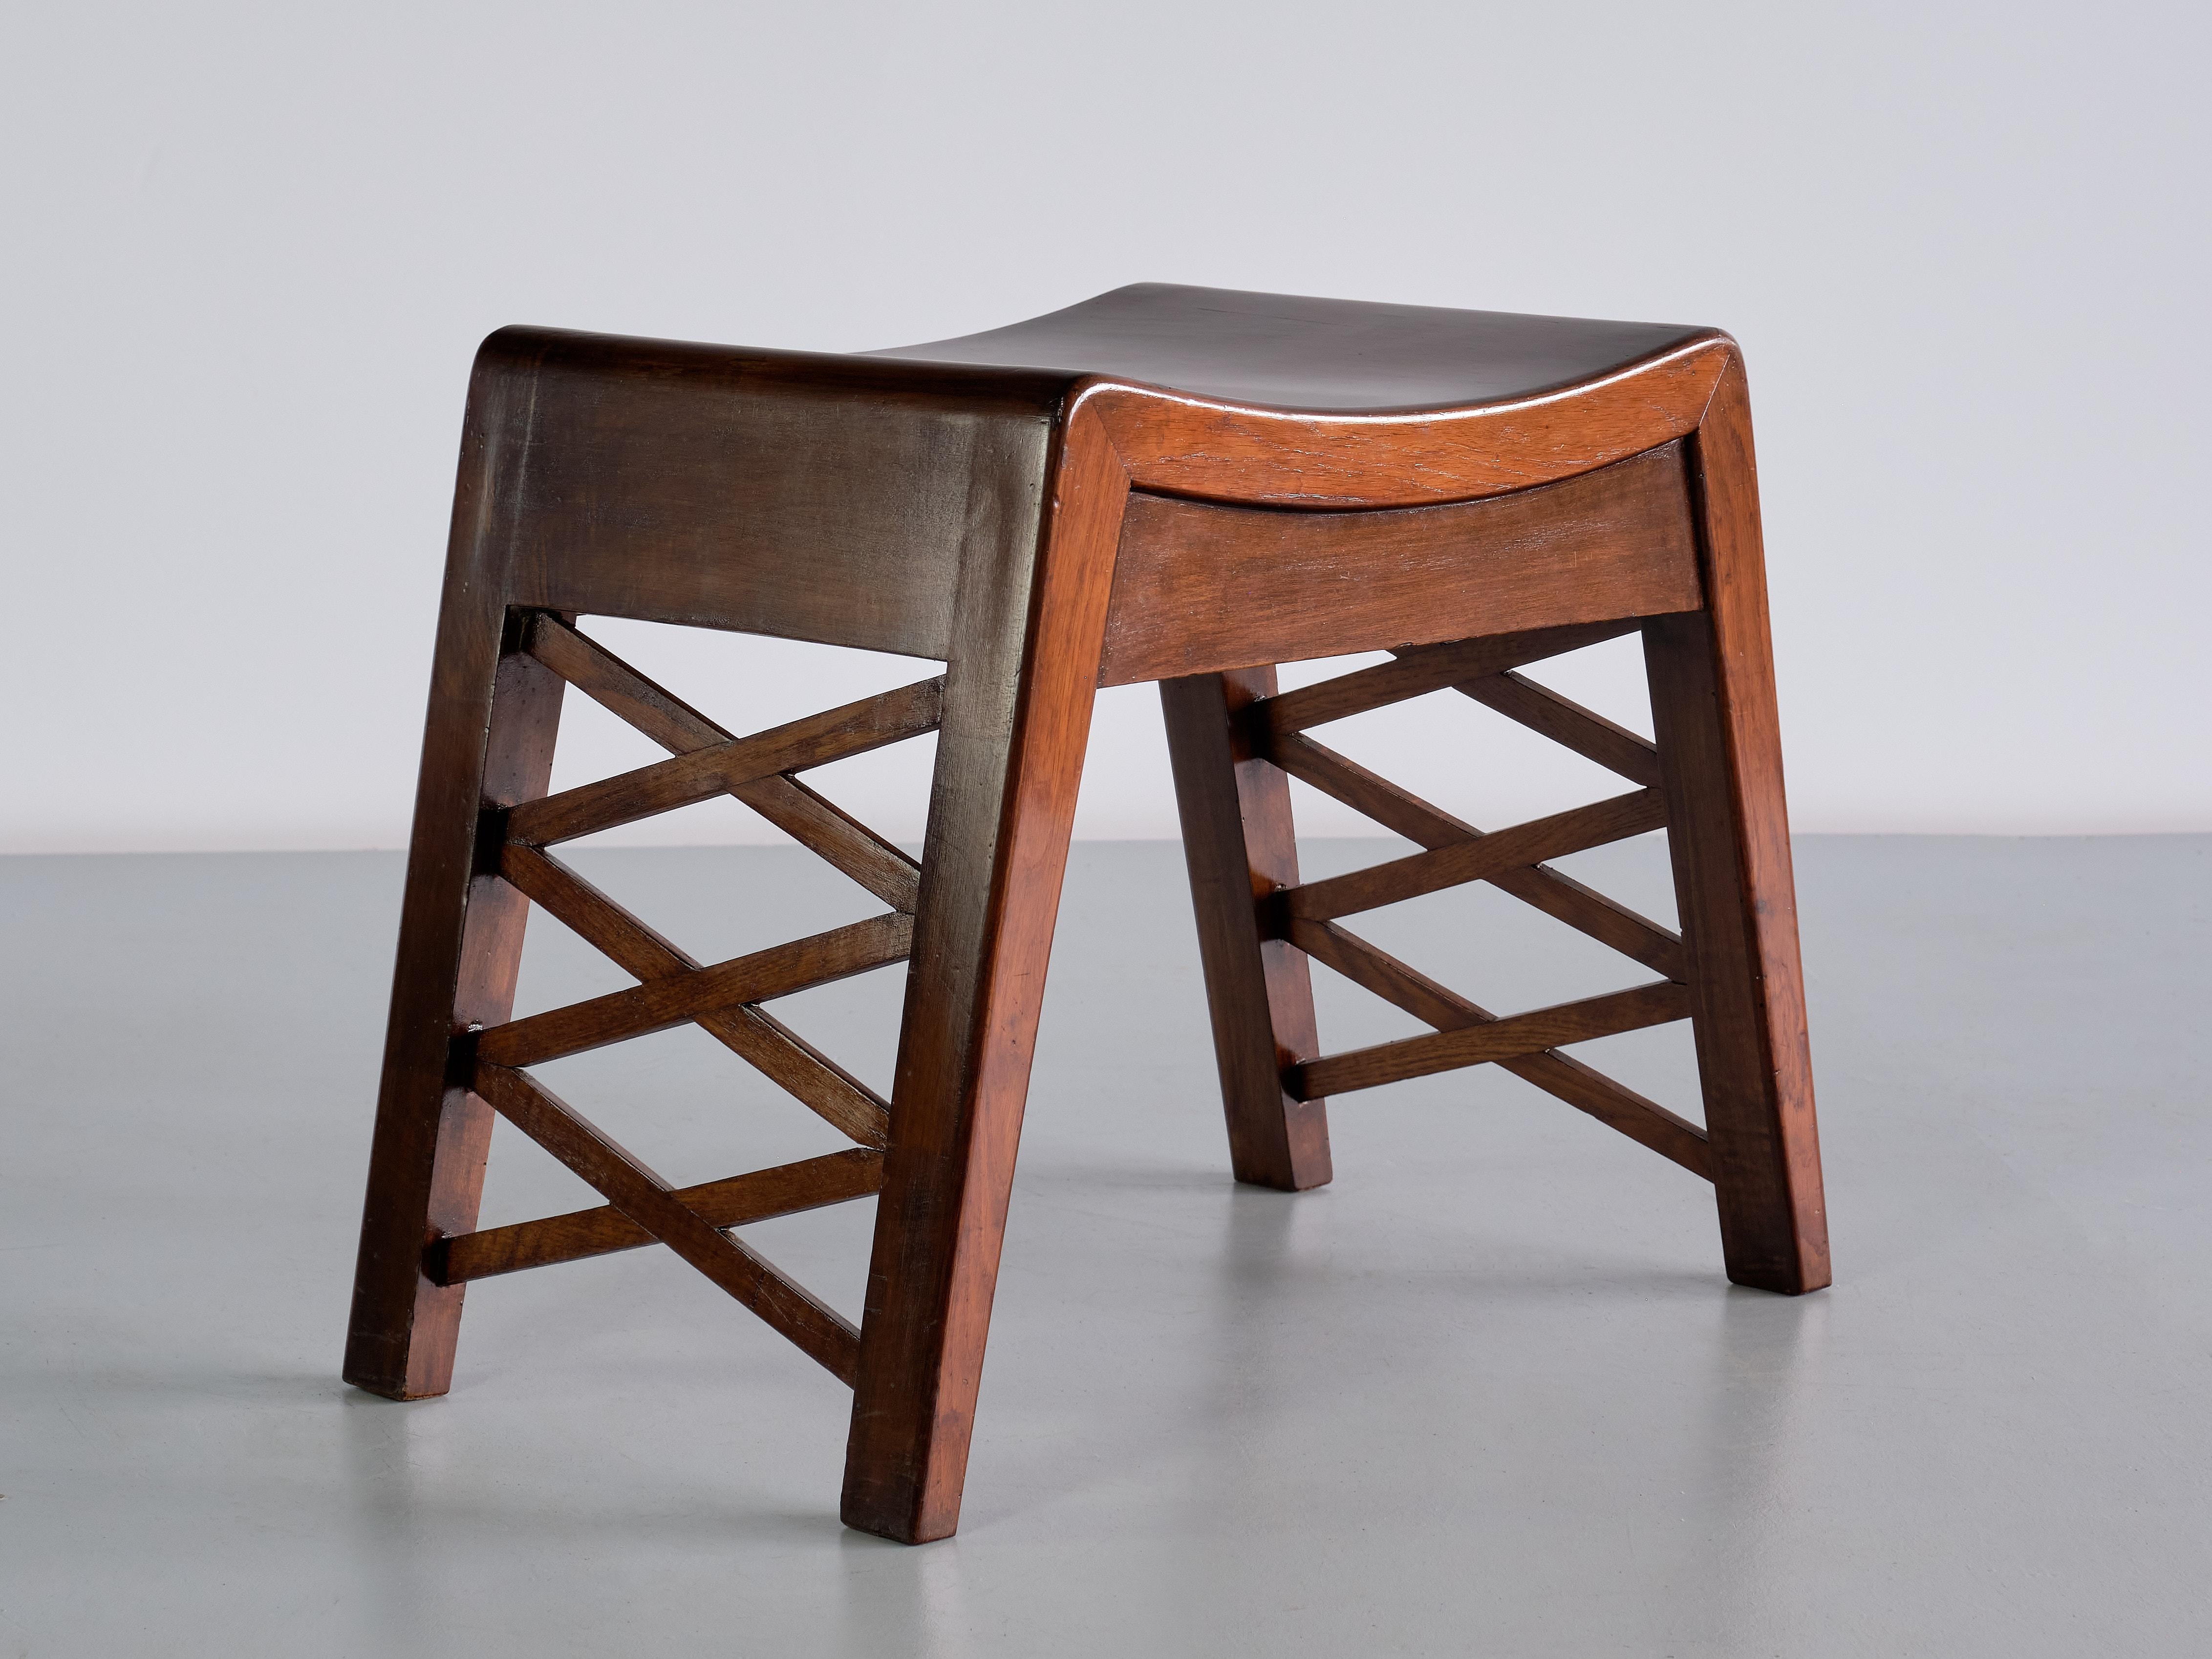 Piero Portaluppi Attributed Pair of Stools in Chestnut Wood, Italy, Late 1930s For Sale 1